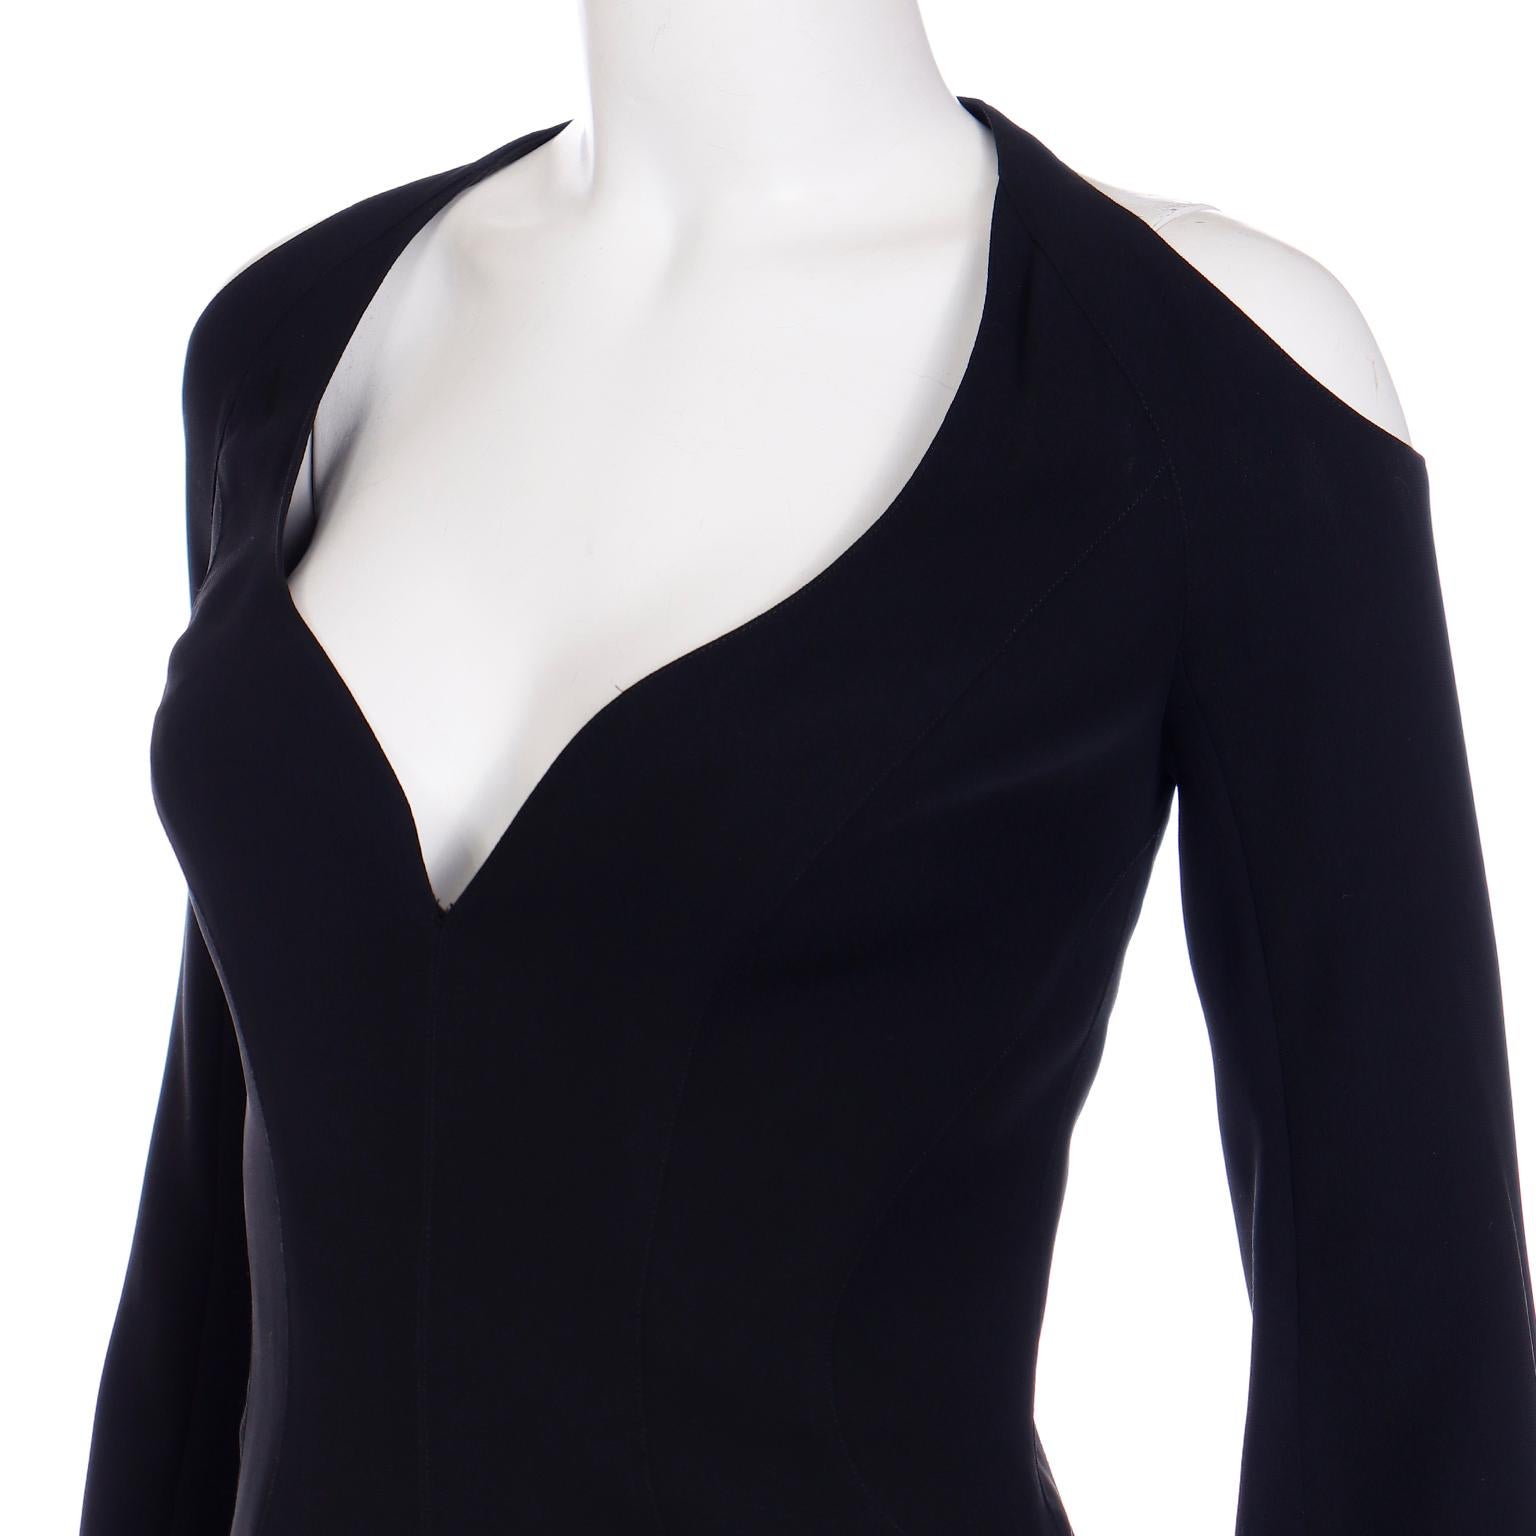 Thierry Mugler 2000 Black Cold Shoulder Evening Dress Samantha Sex and The City For Sale 1